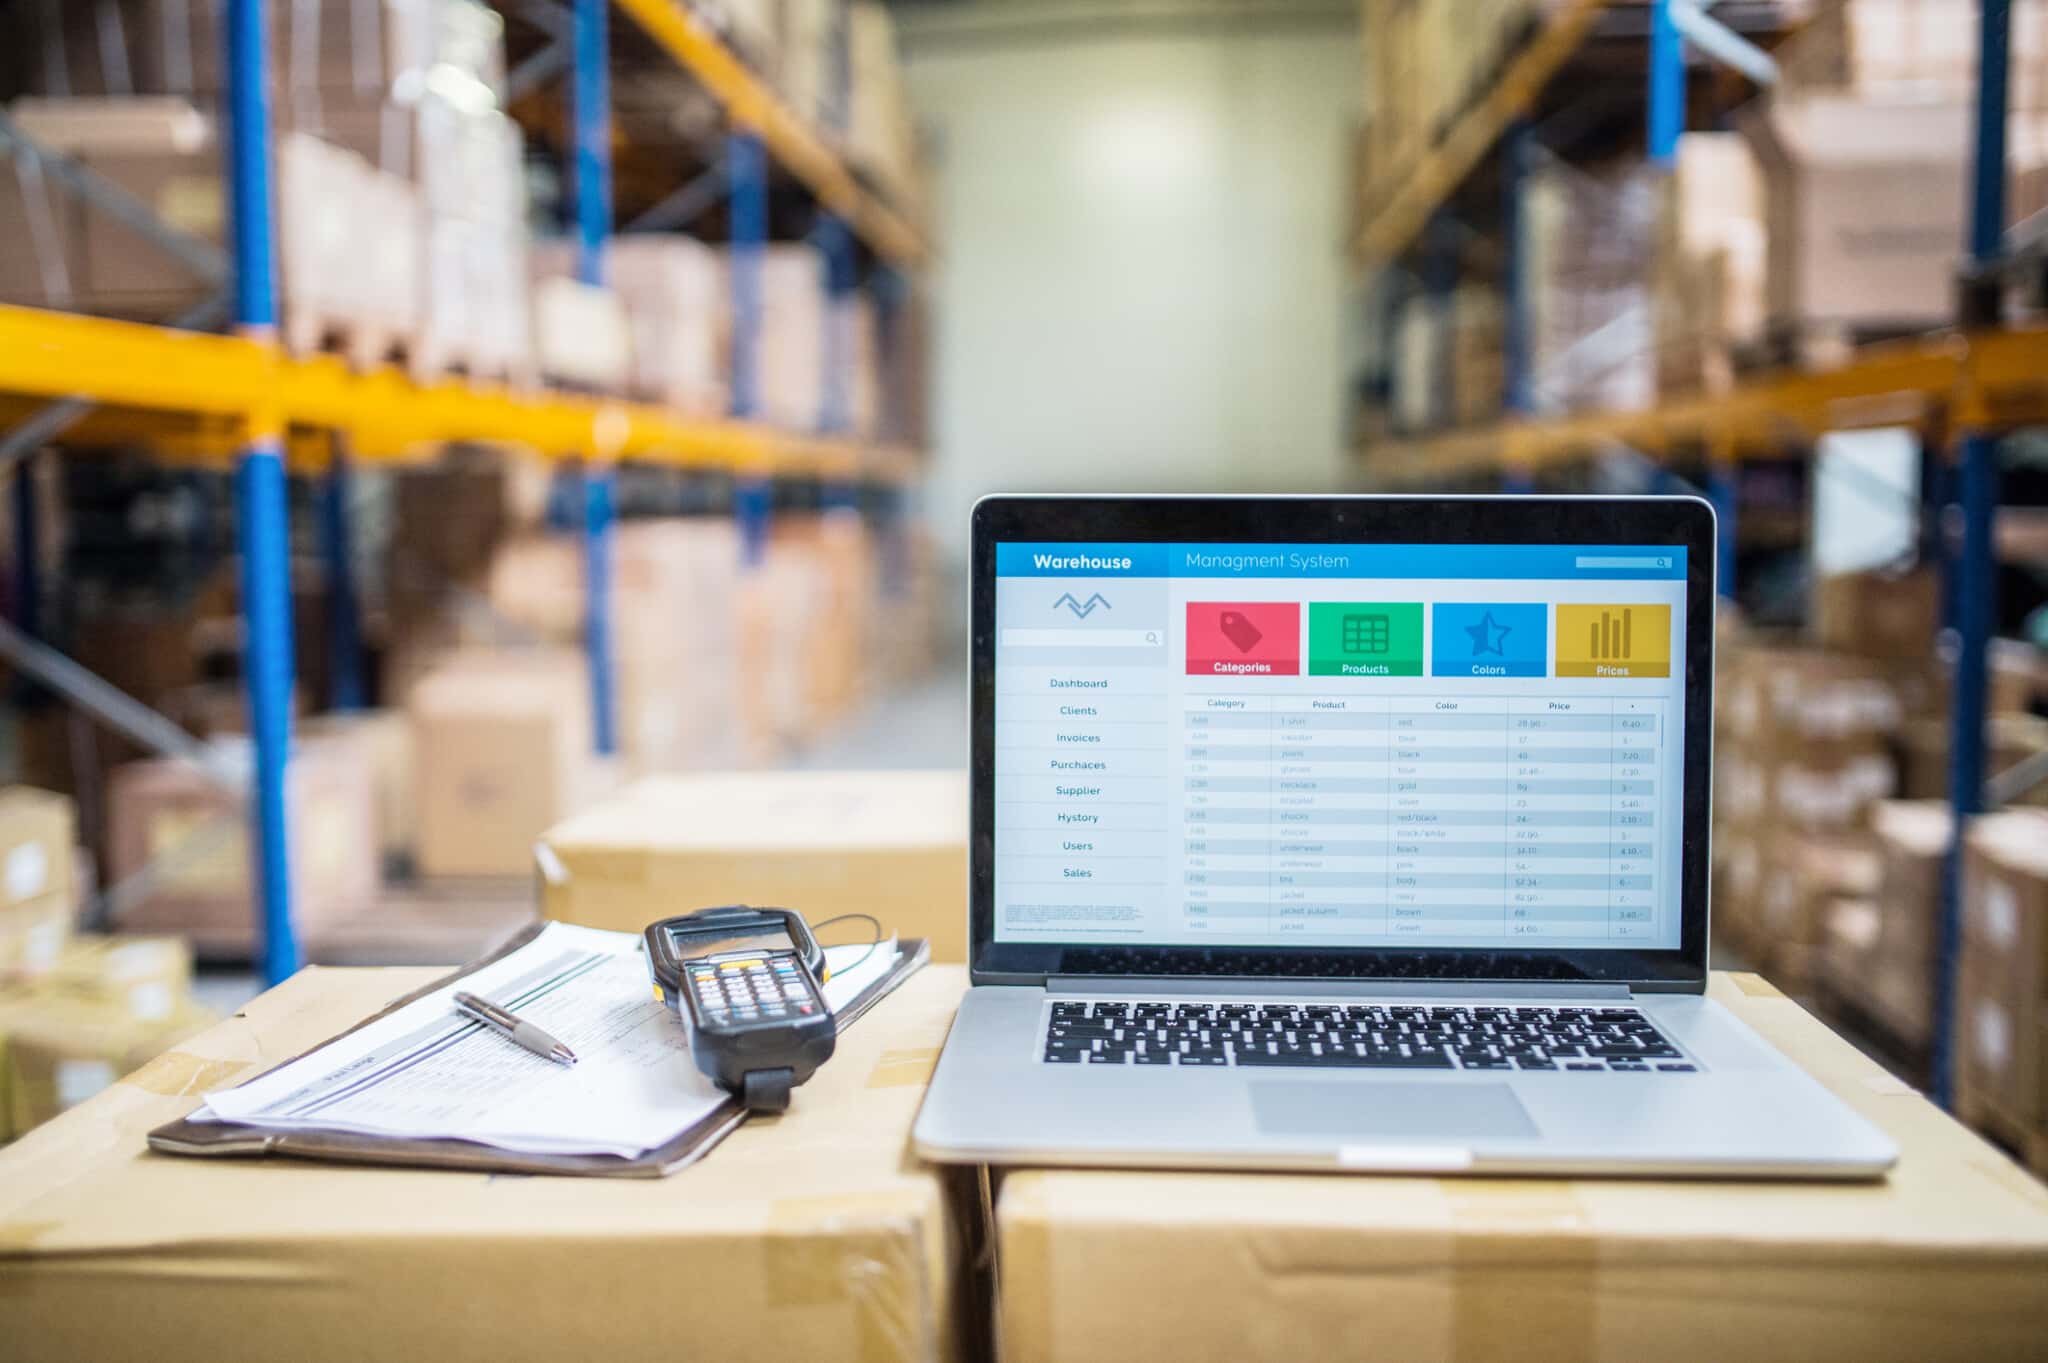 An open laptop displays warehouse inventory with a barcode scanner laying next to it and blurred shelves in the background.